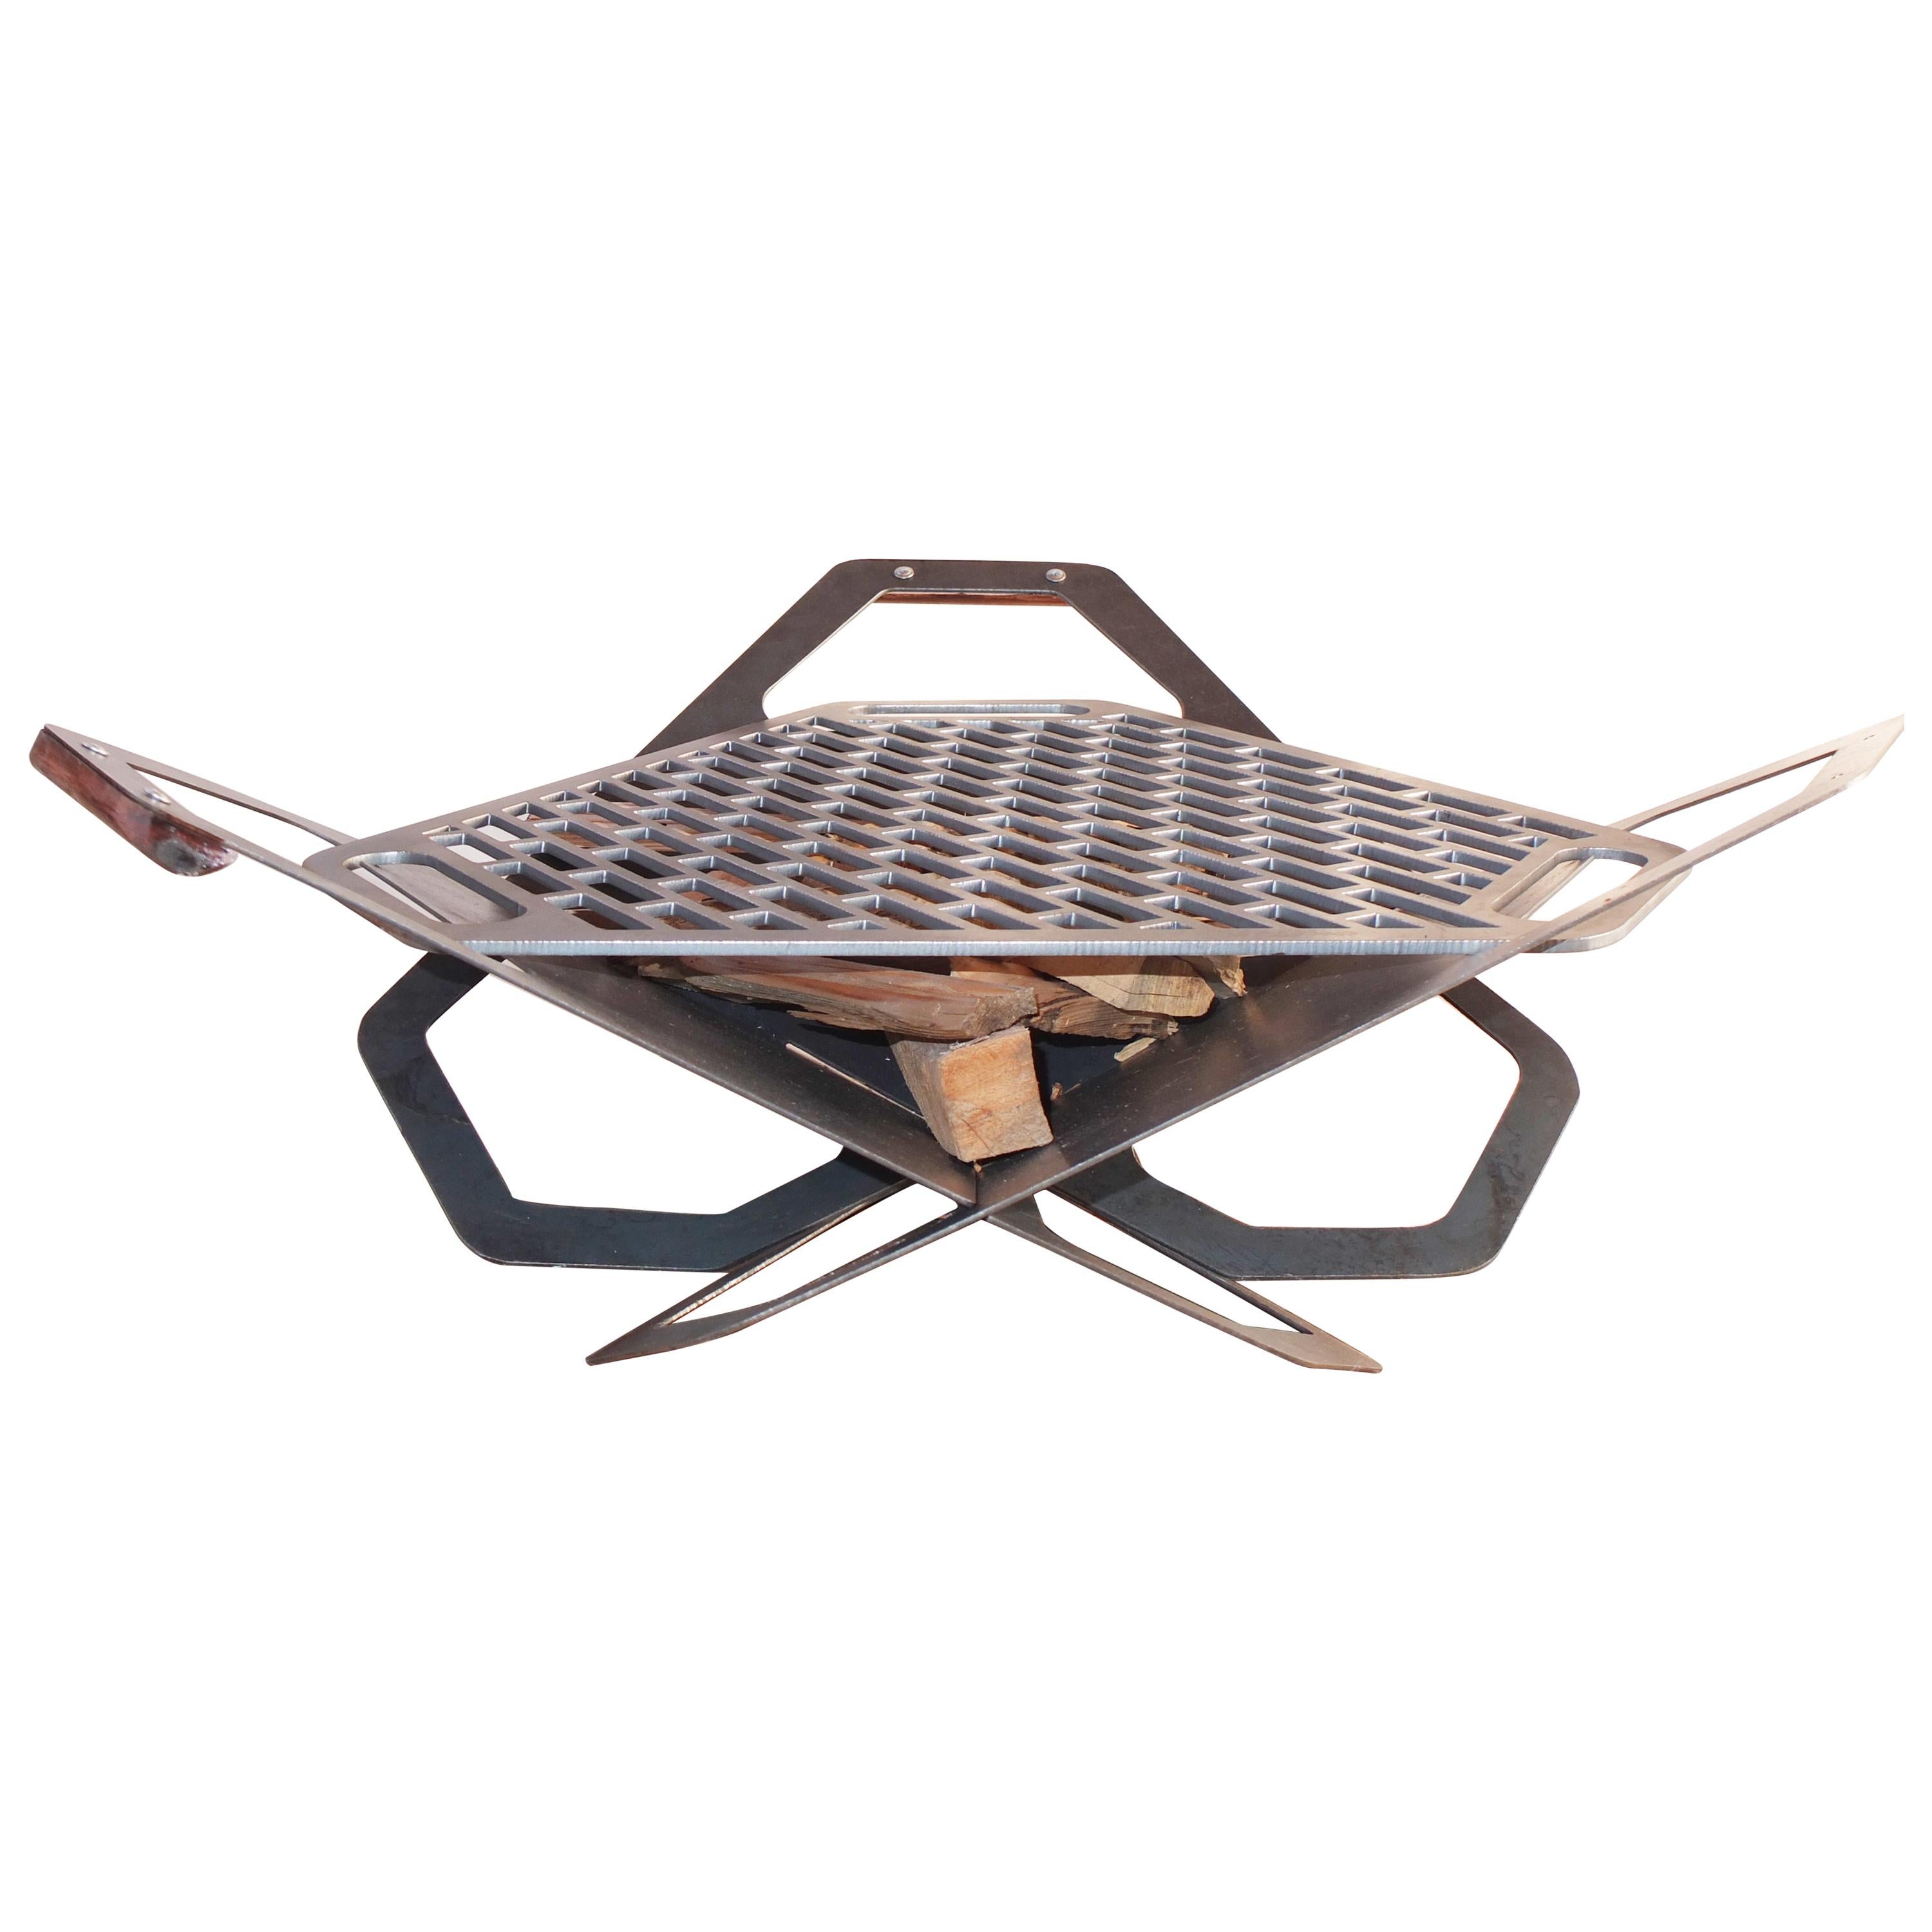 Unique Design of Demountable Fire Pit or BBQ Made of Plasma Cut Steel